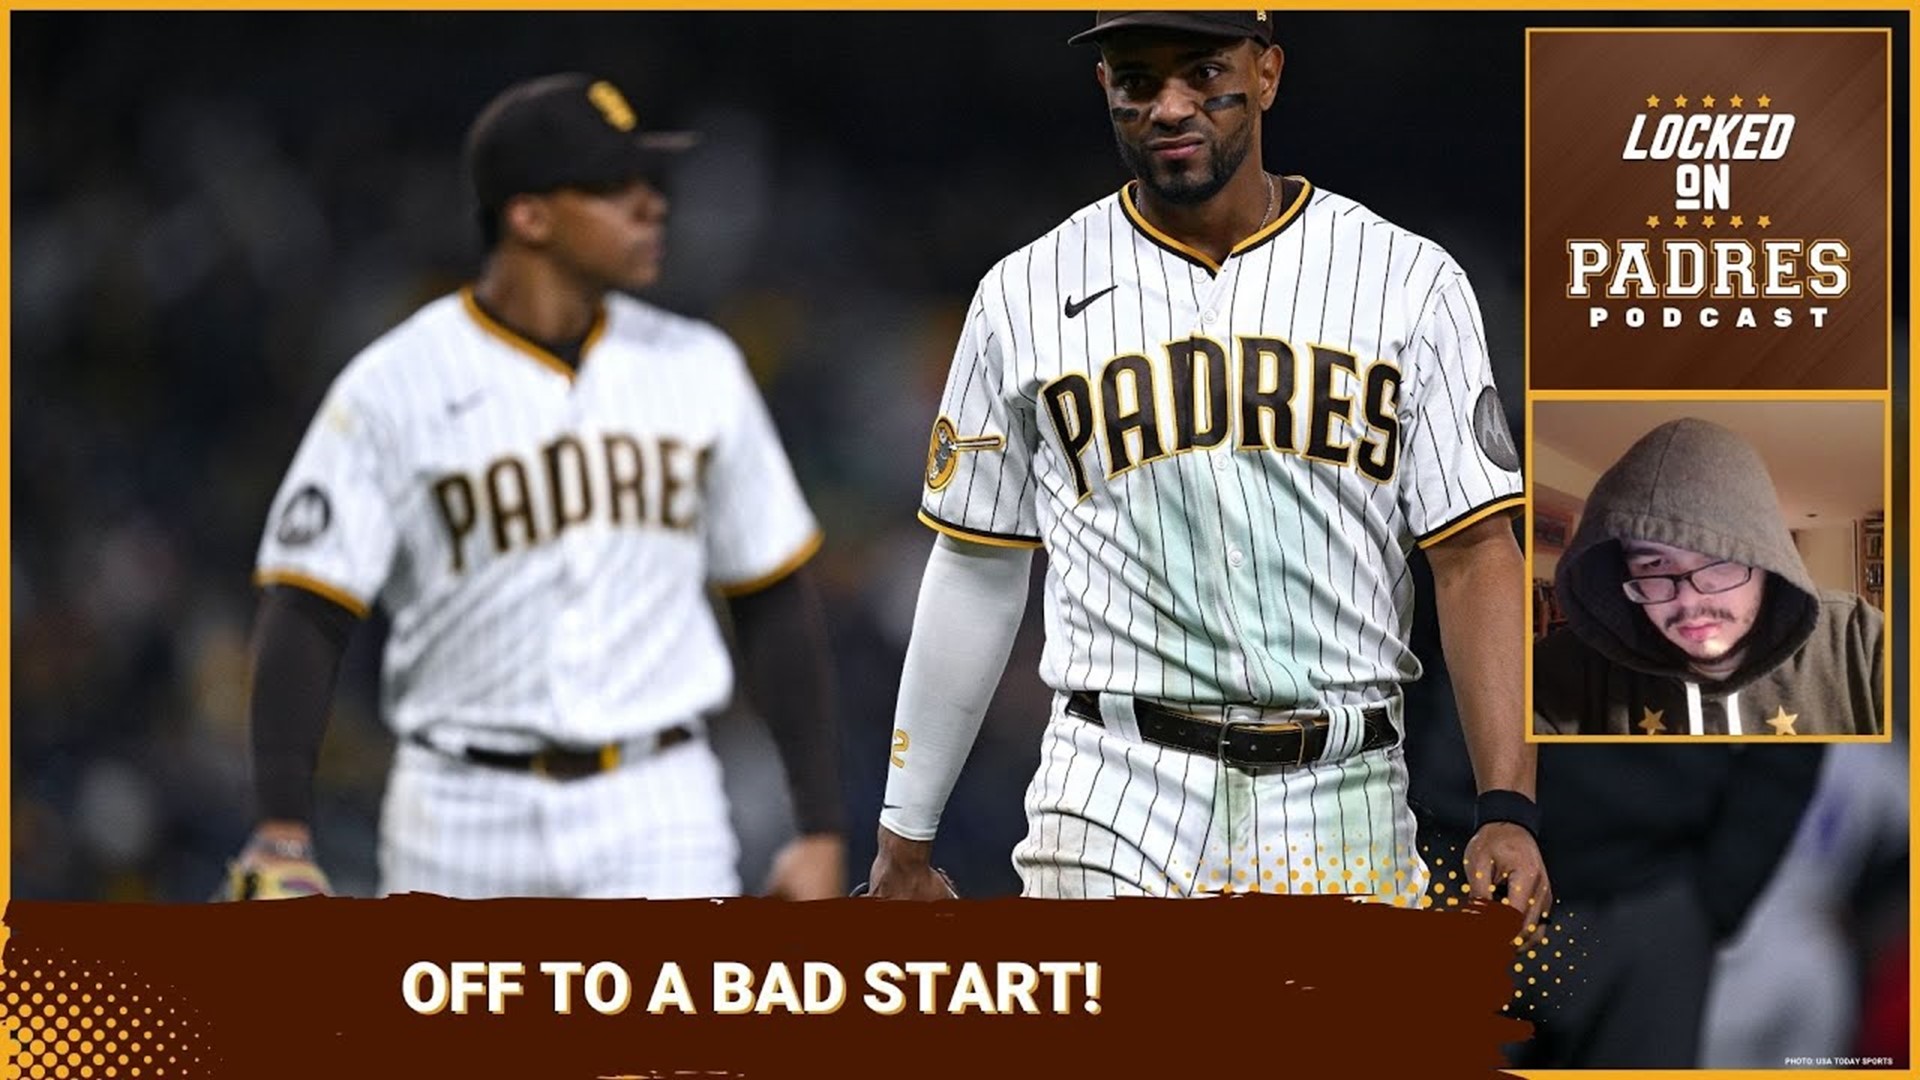 Oof! On today's episode, Javier recaps the long-awaited Opening Day game for the 2023 Padres that resulted...in a bad loss